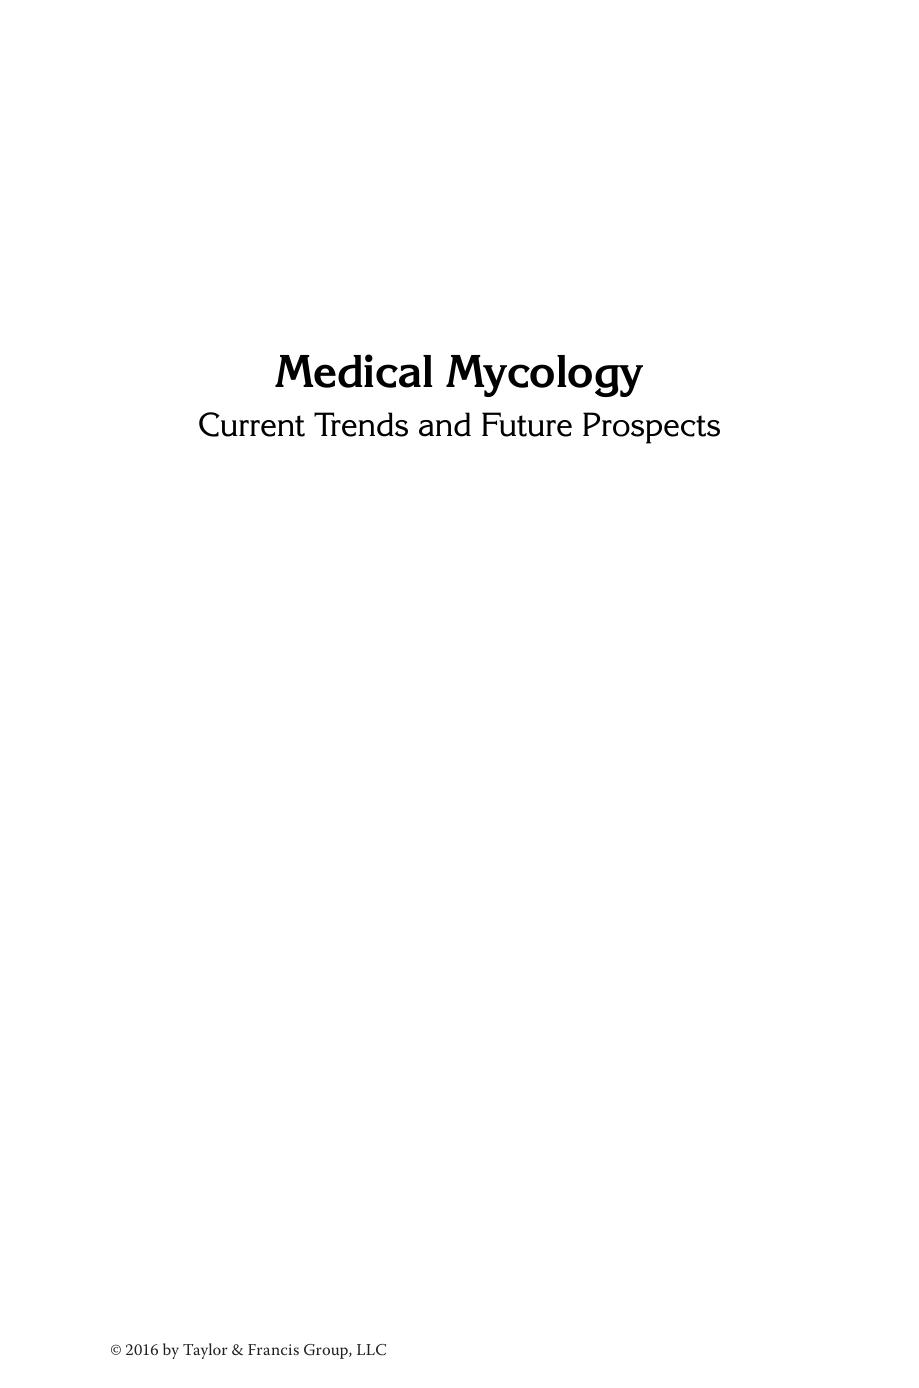 Medical Mycology  Current Trends and Future Prospects (2015)